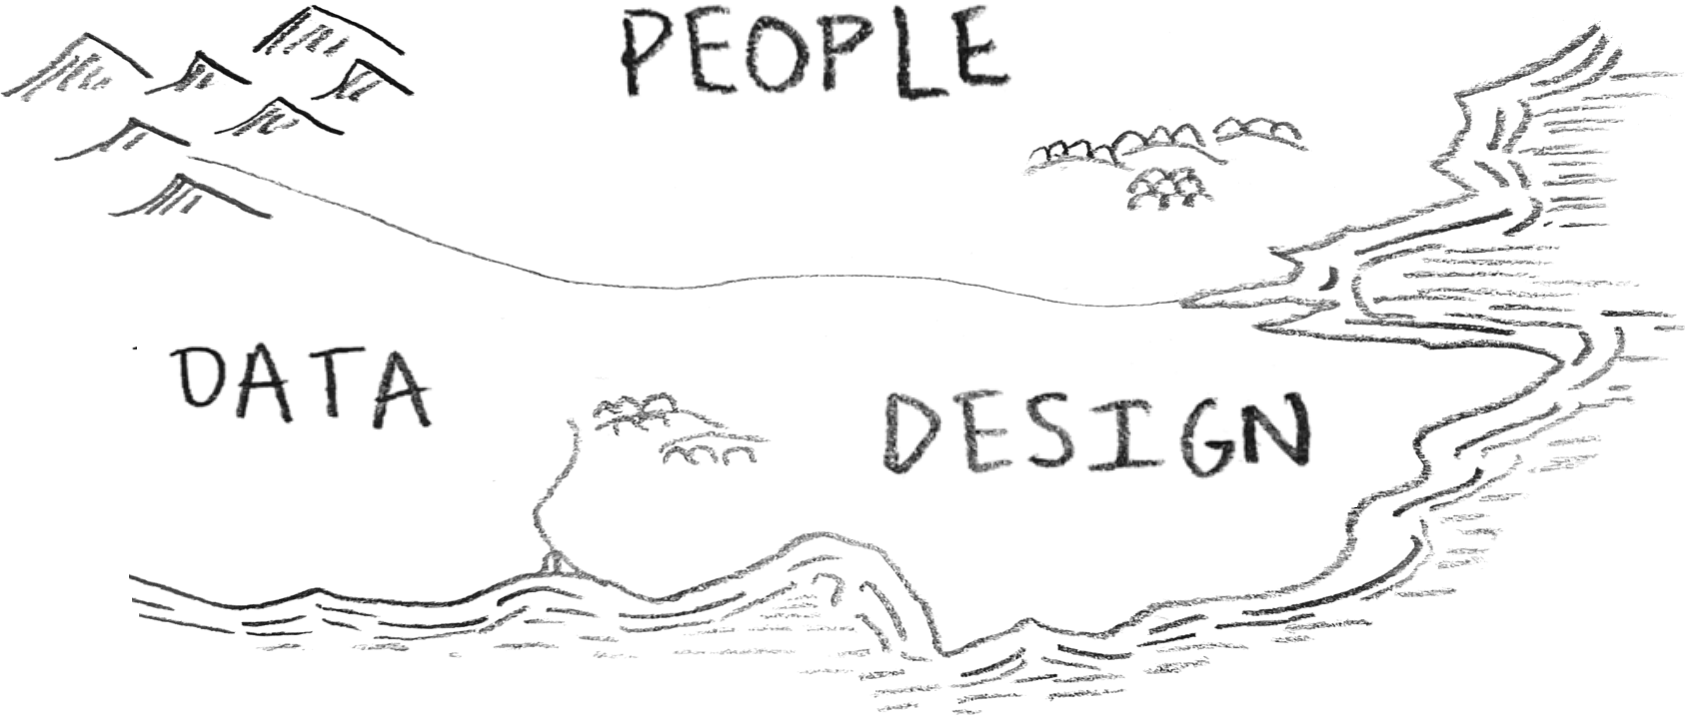 A sketchily drawn map labelled with 'people', 'data', and 'design'.